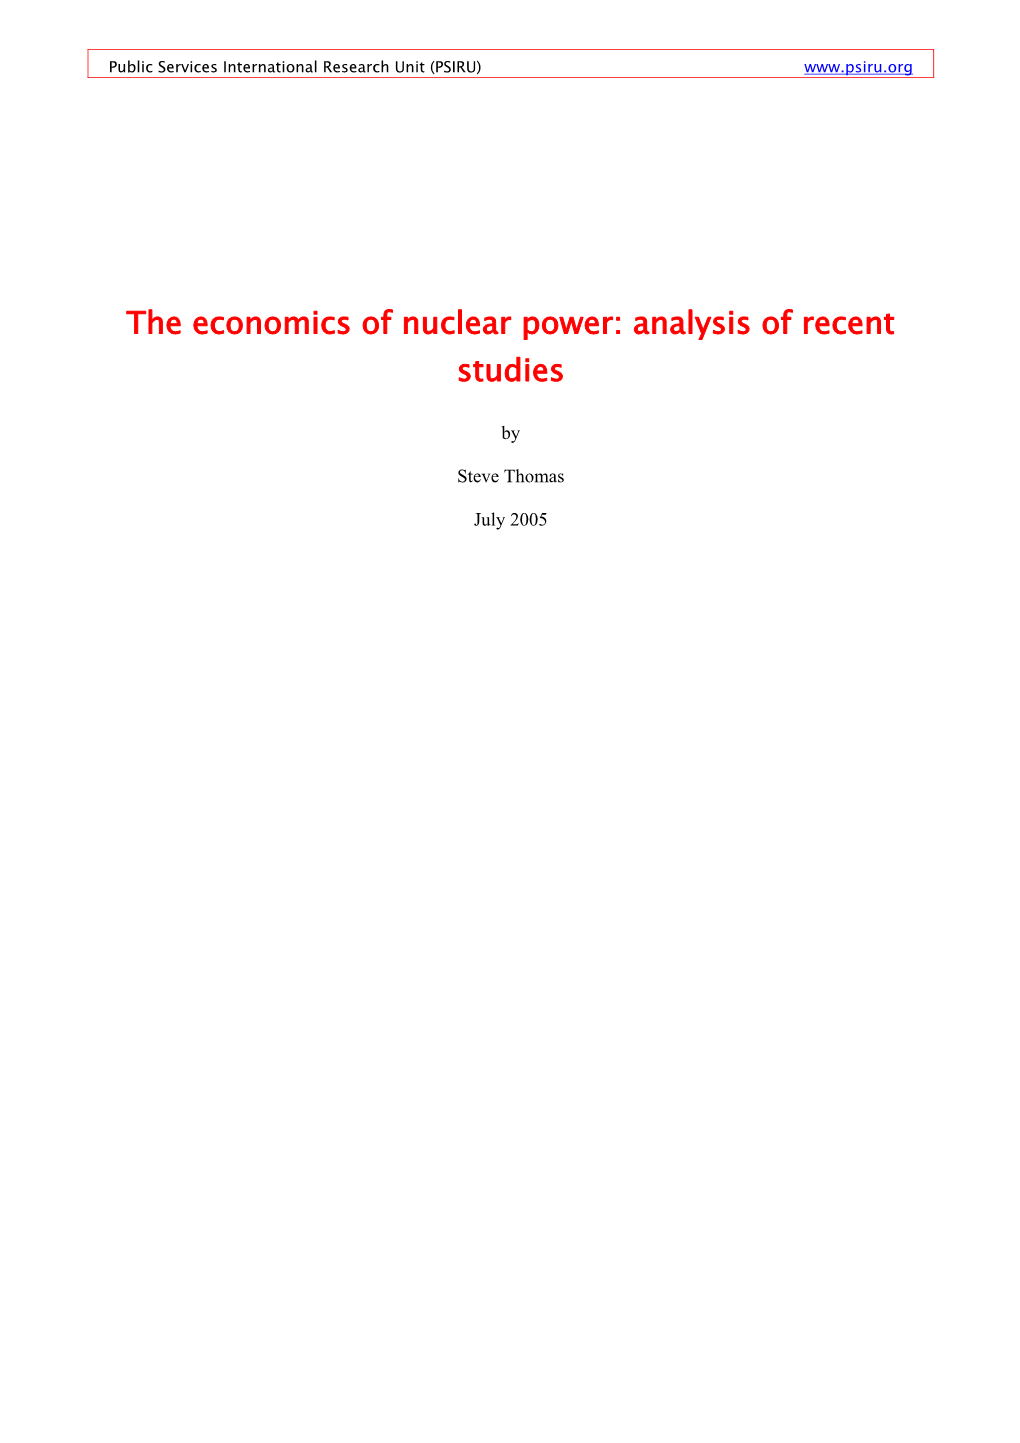 The Economics of Nuclear Power: Analysis of Recent Studies